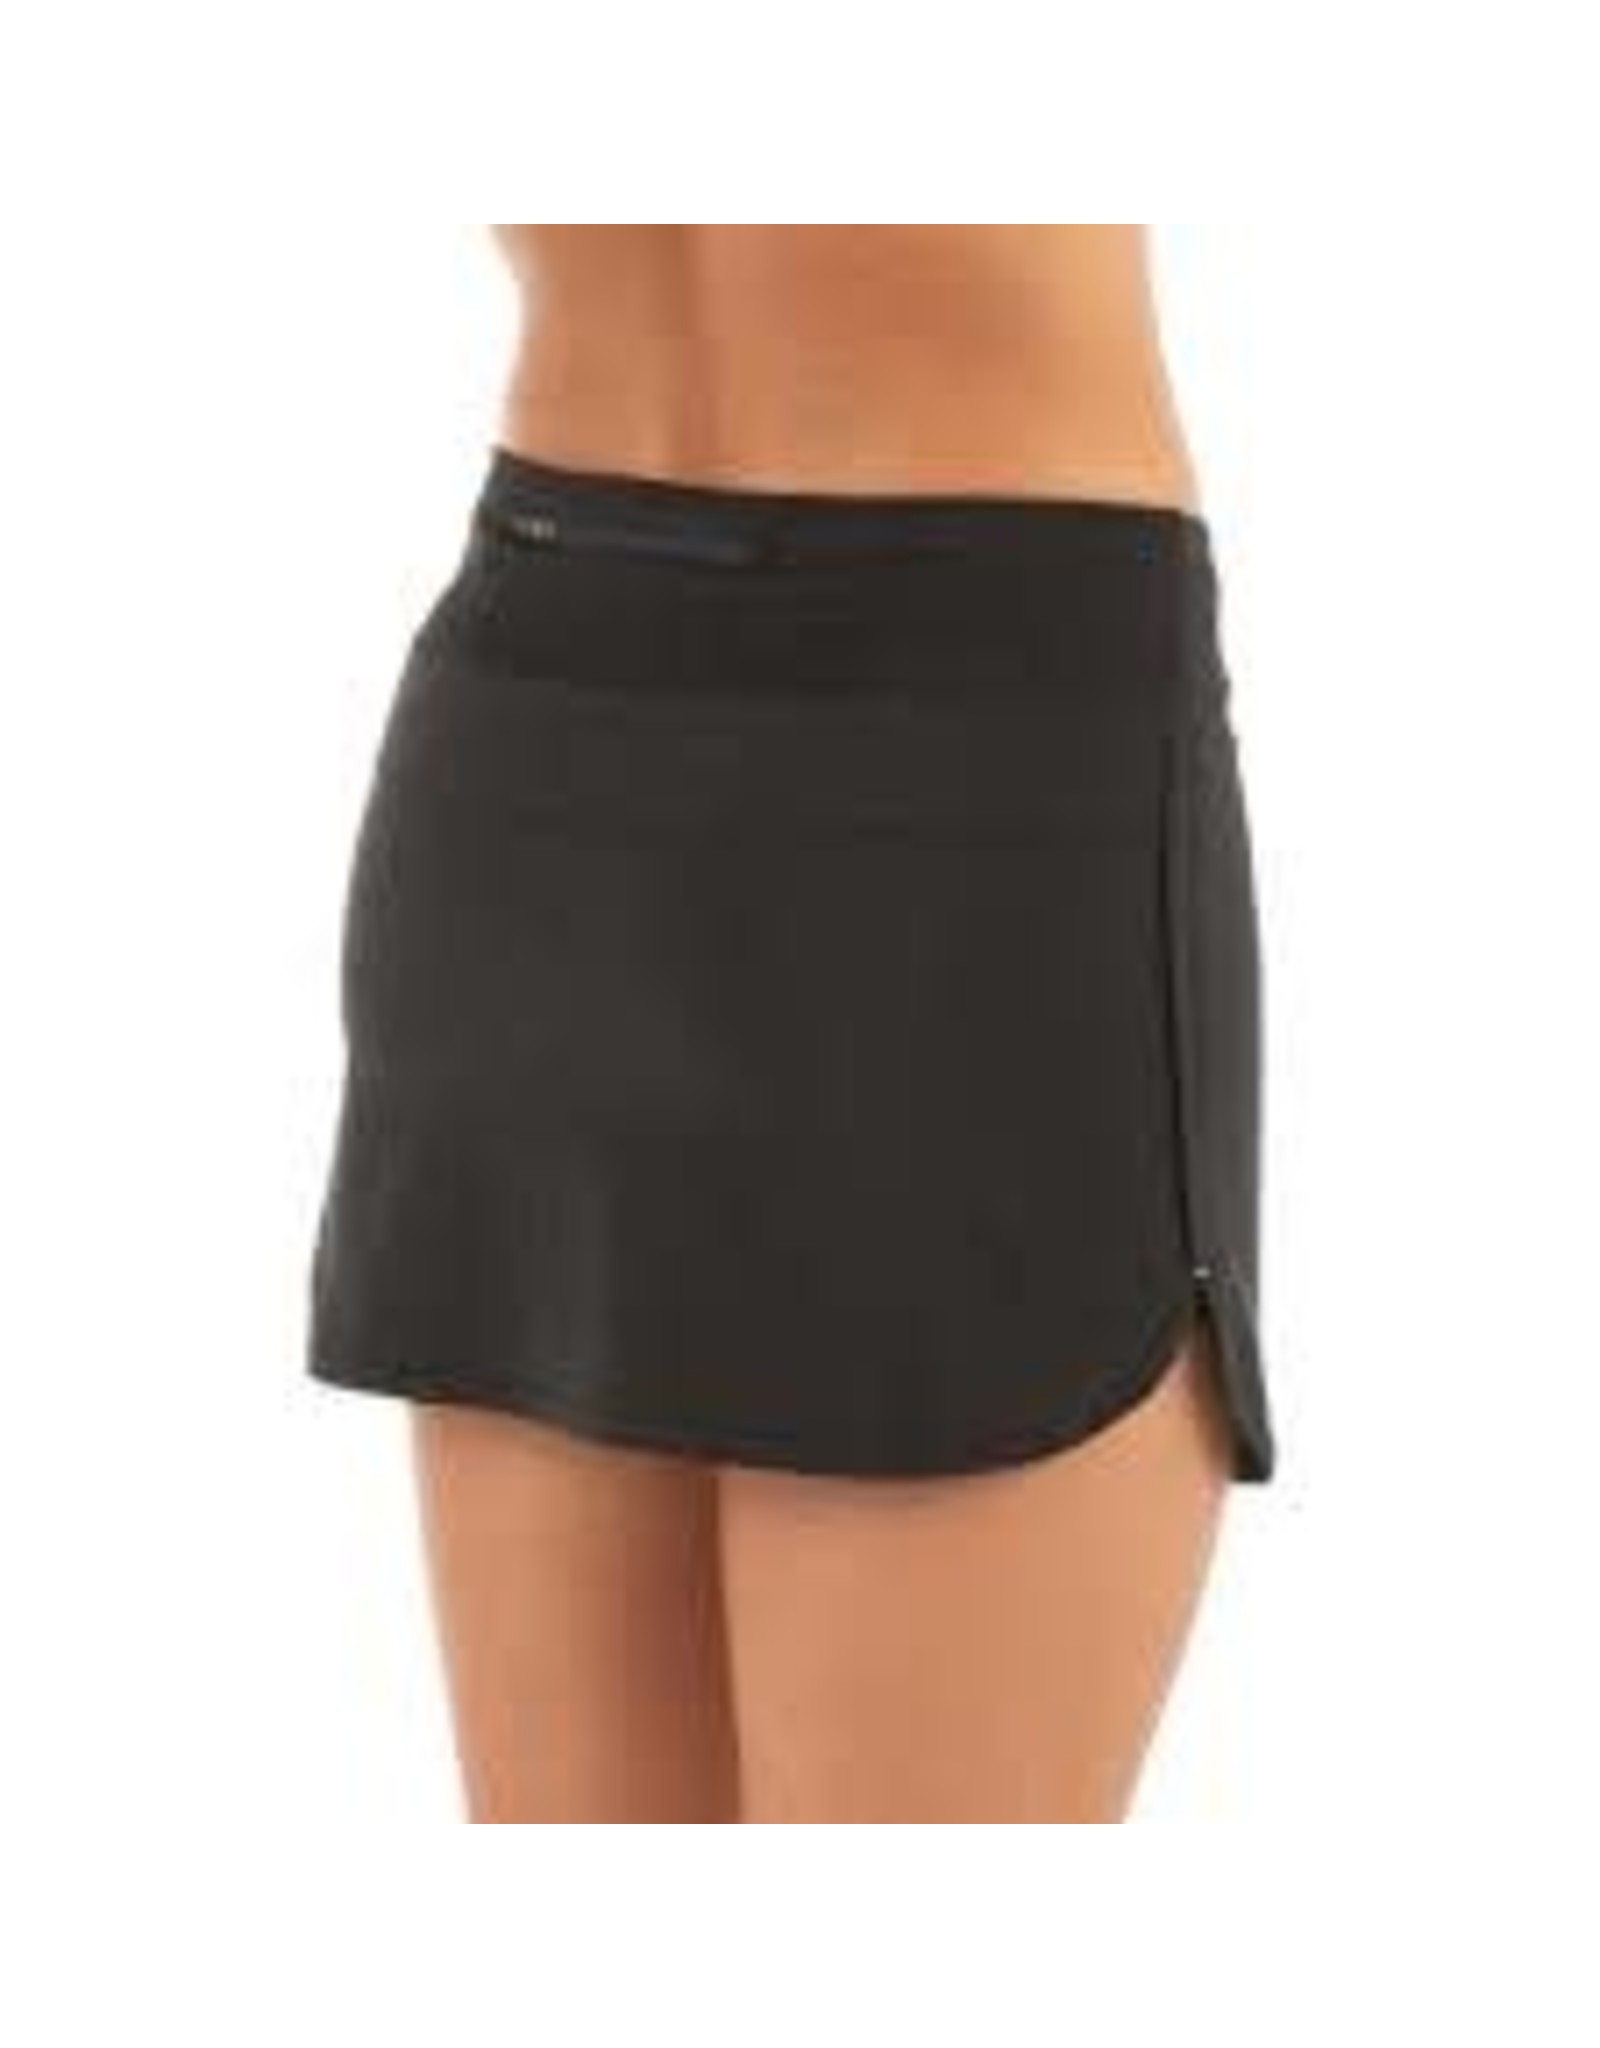 Free Fly Apparel Womens Bamboo-Lined Breeze Skort (Black)